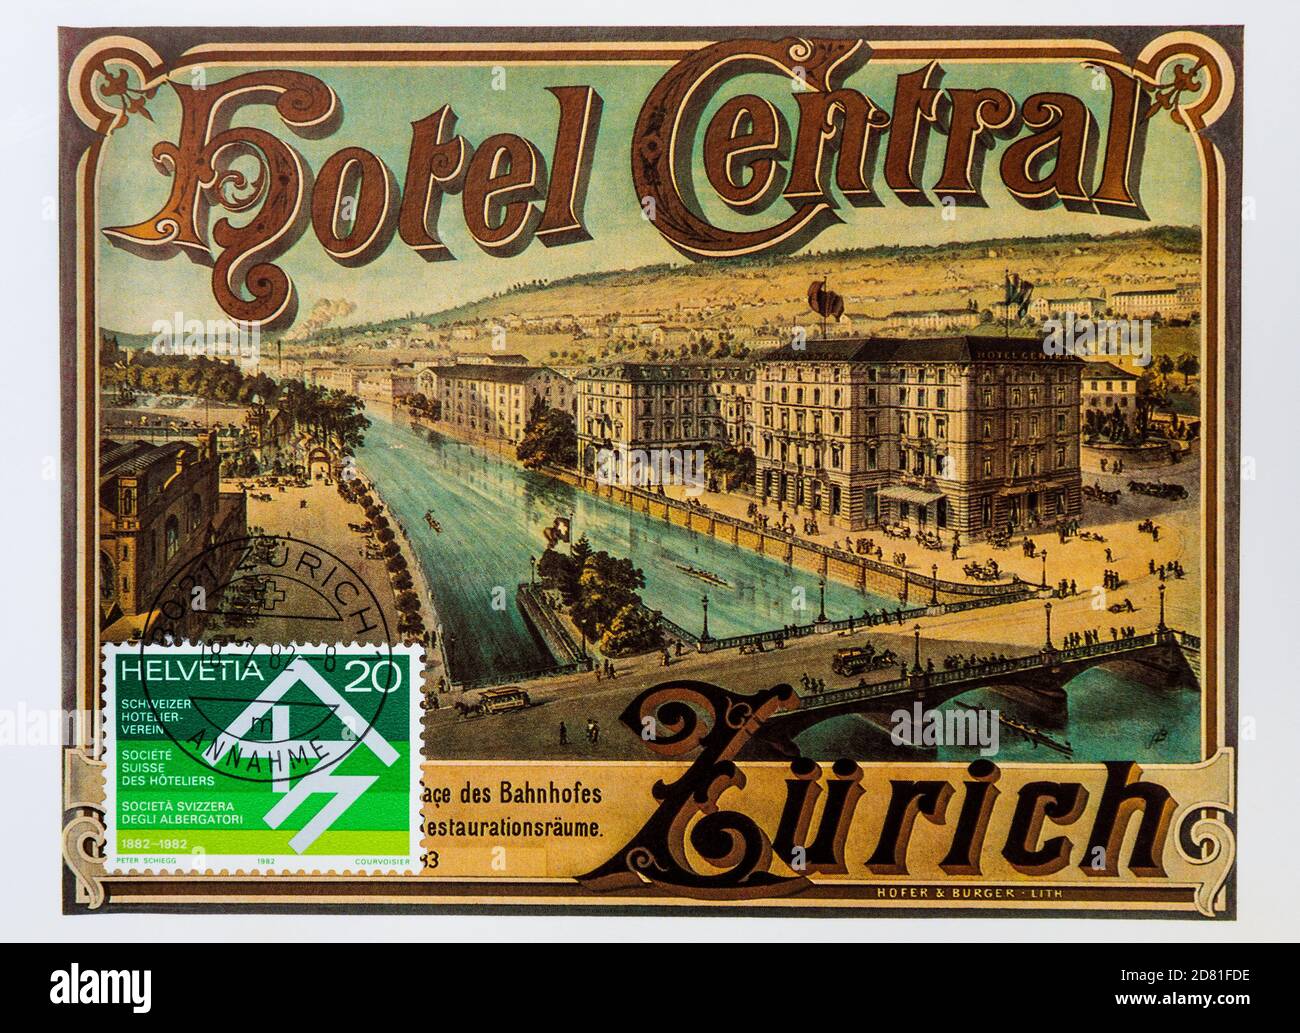 1982 mailed Swiss postcard illustrating a 1883 publicity poster for the Hotel Central, Zurich, Switzerland. Stock Photo